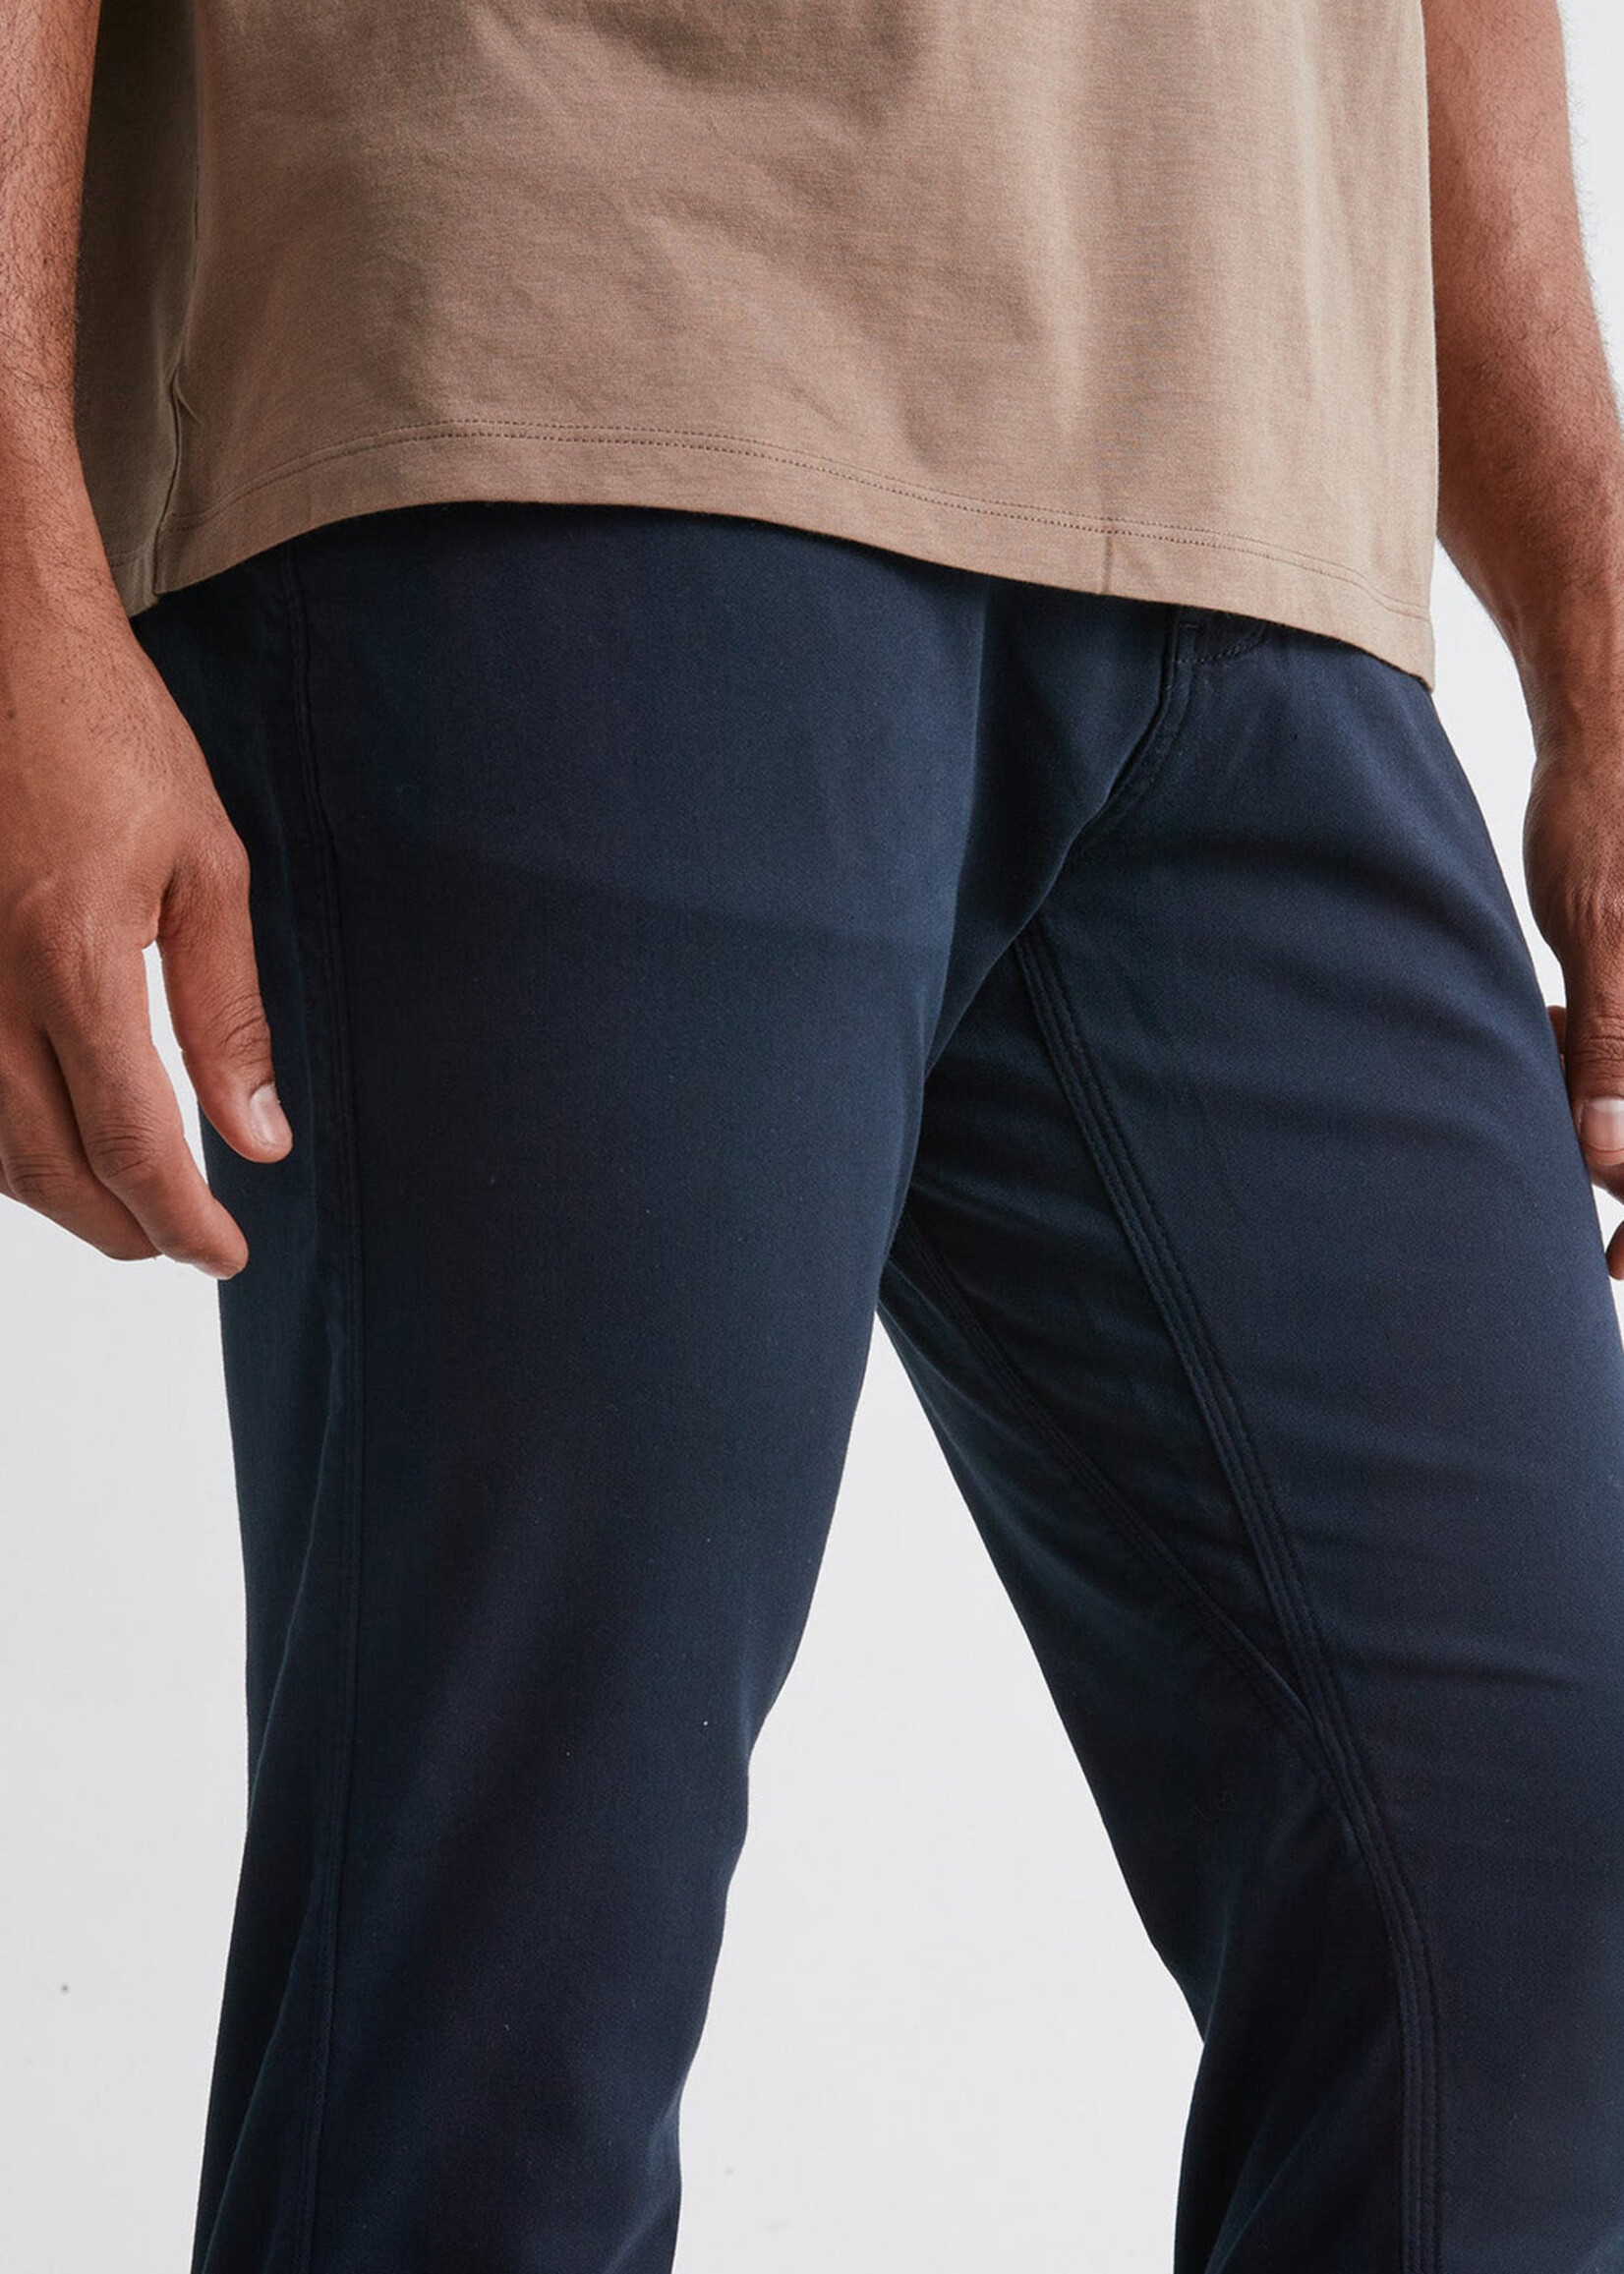 DUER No Sweat Pant Relaxed Taper - Navy